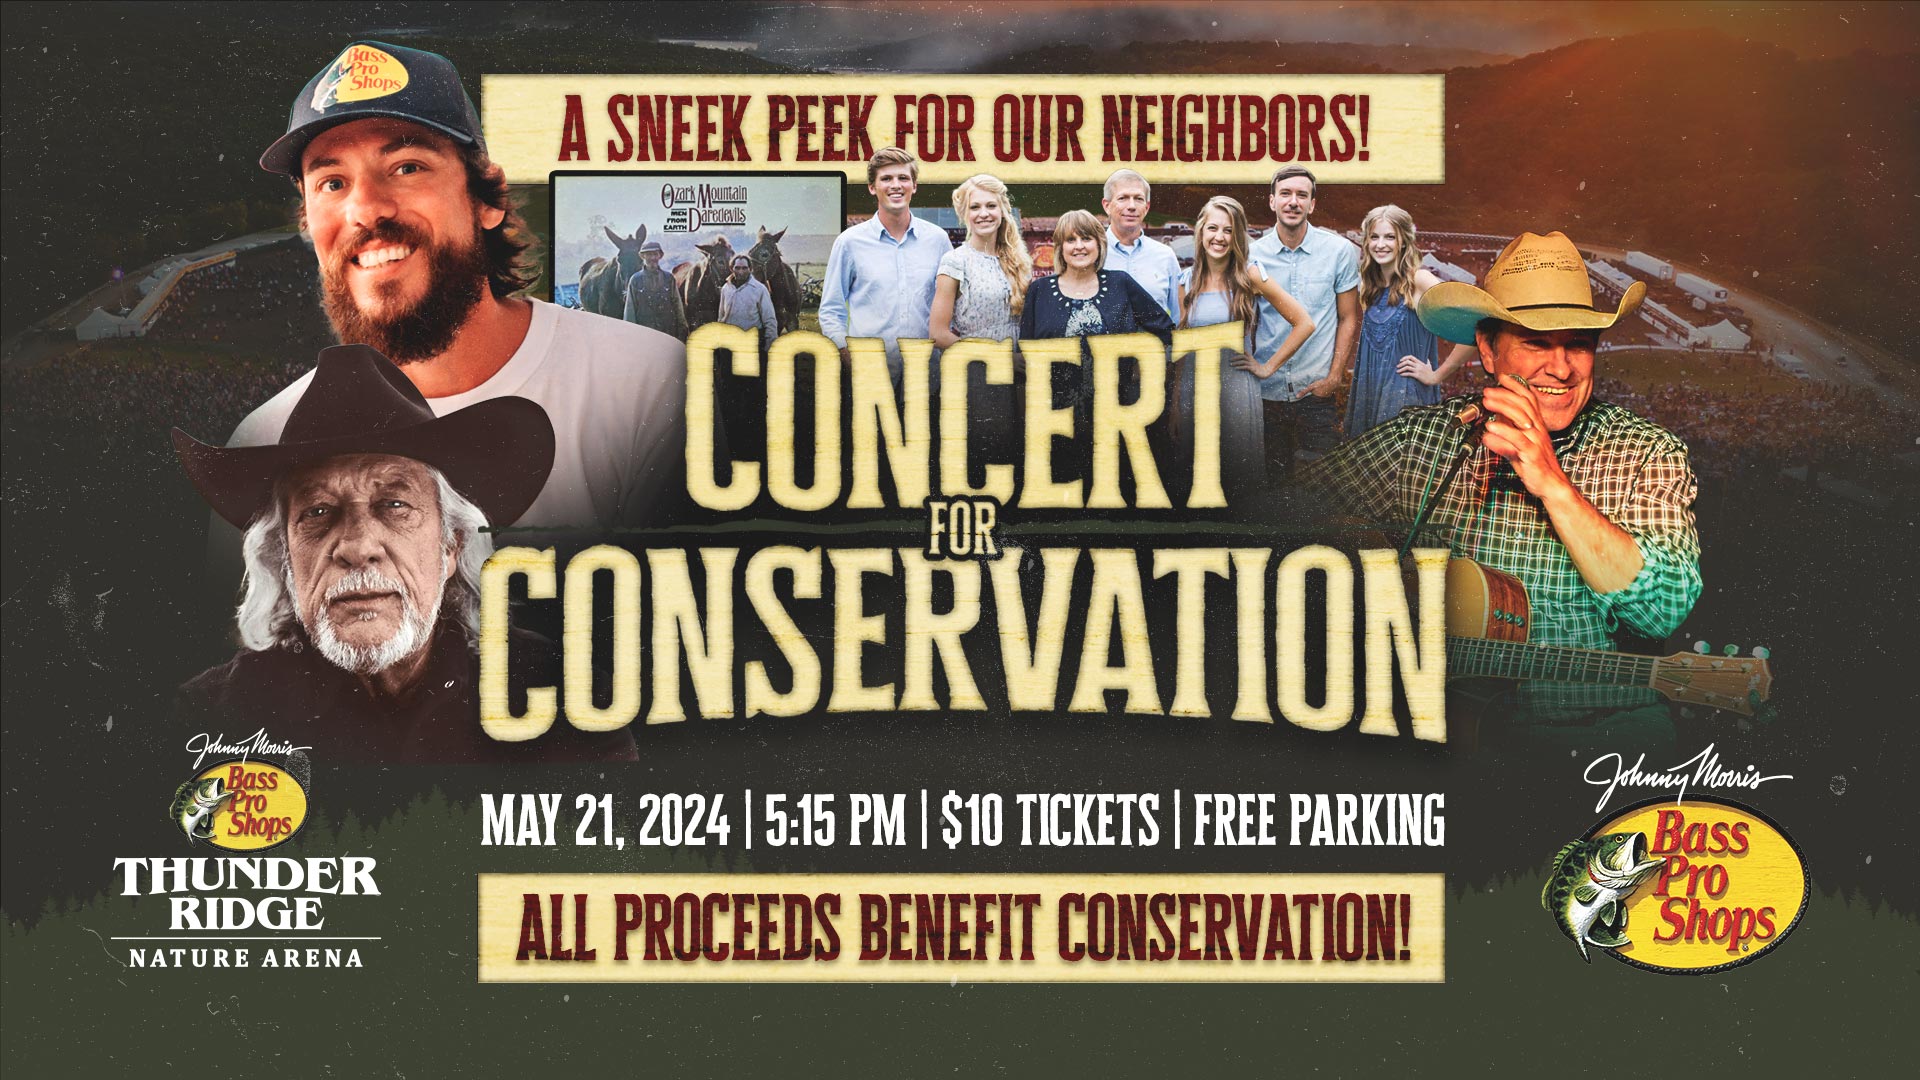 Concert for Conservation at Thunder Ridge Nature Arena